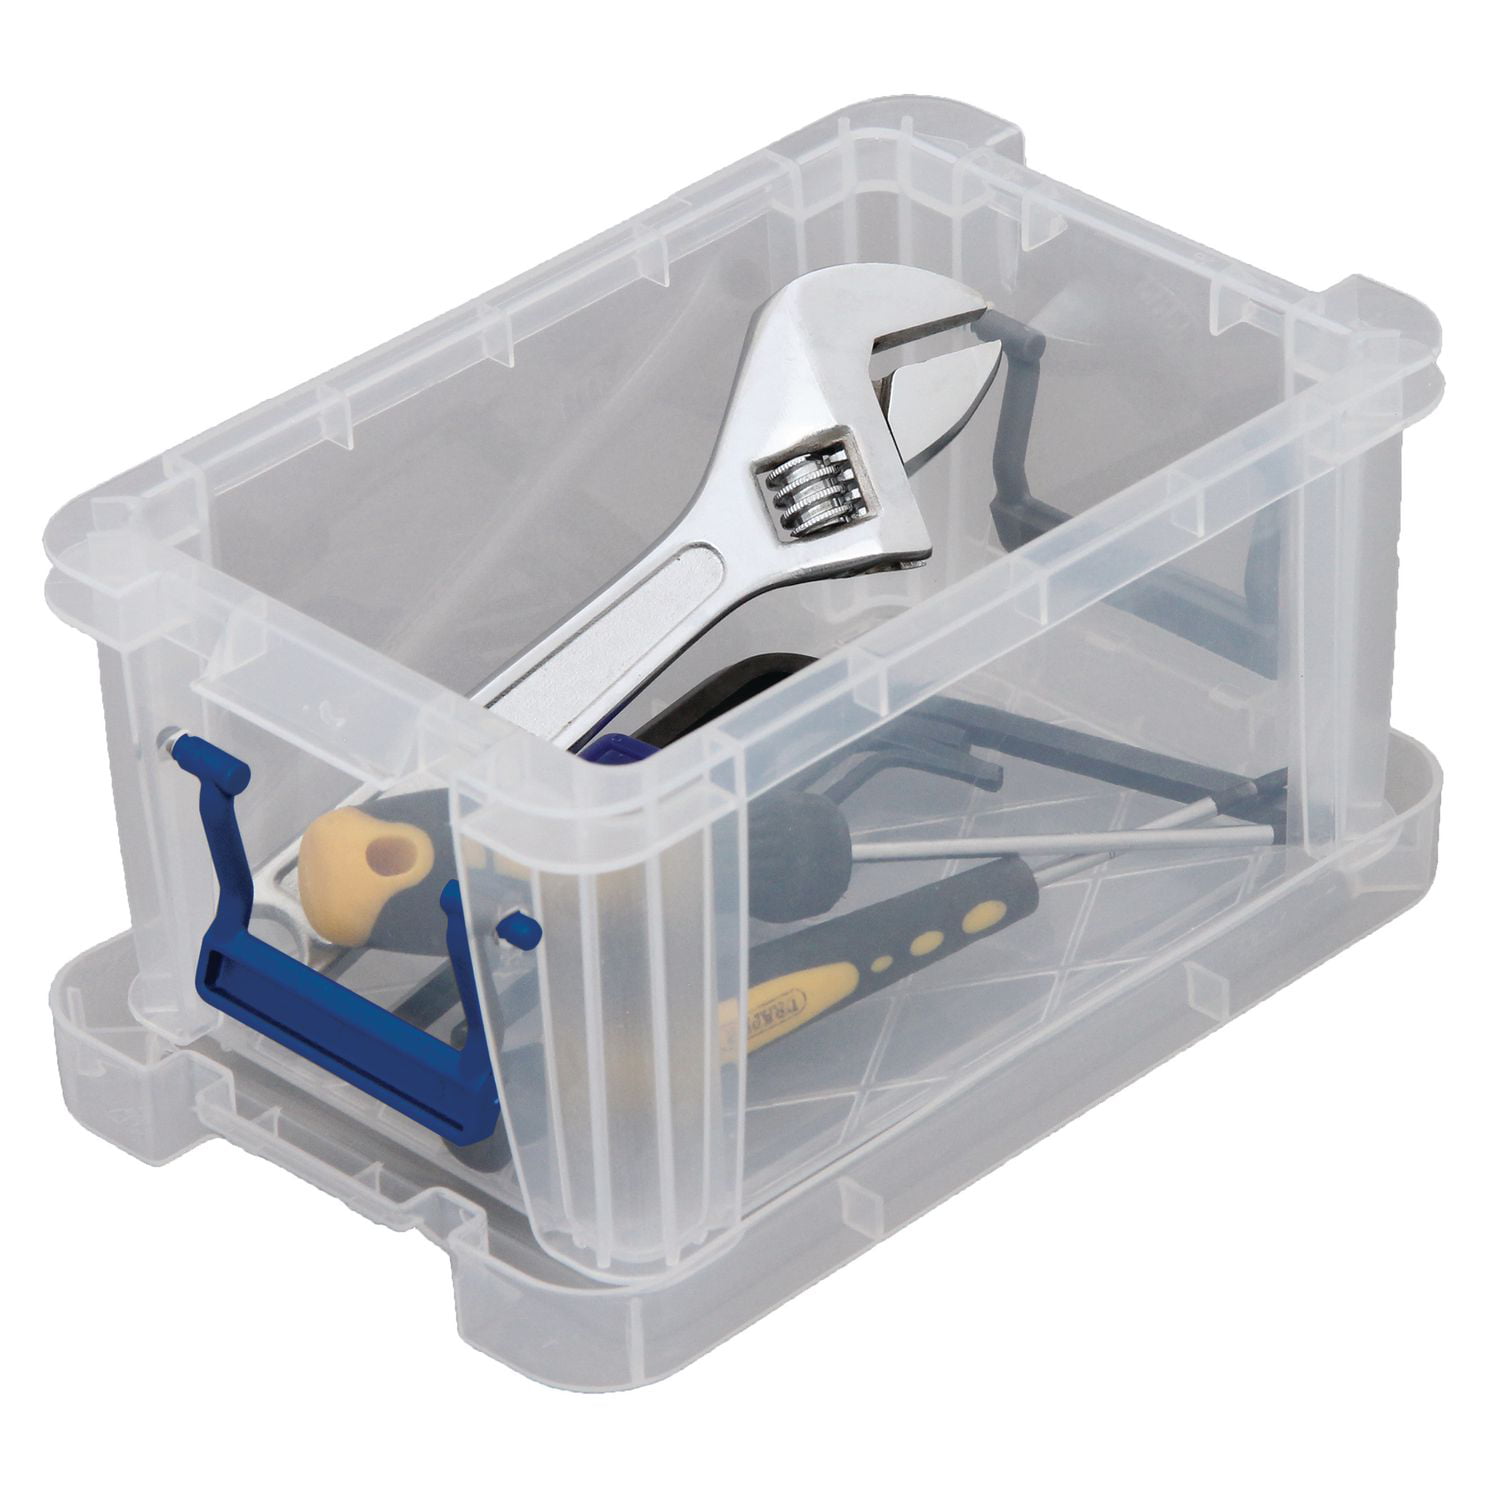 Bankers Box Plastic Storage Box 1L, Ideal for organizing 